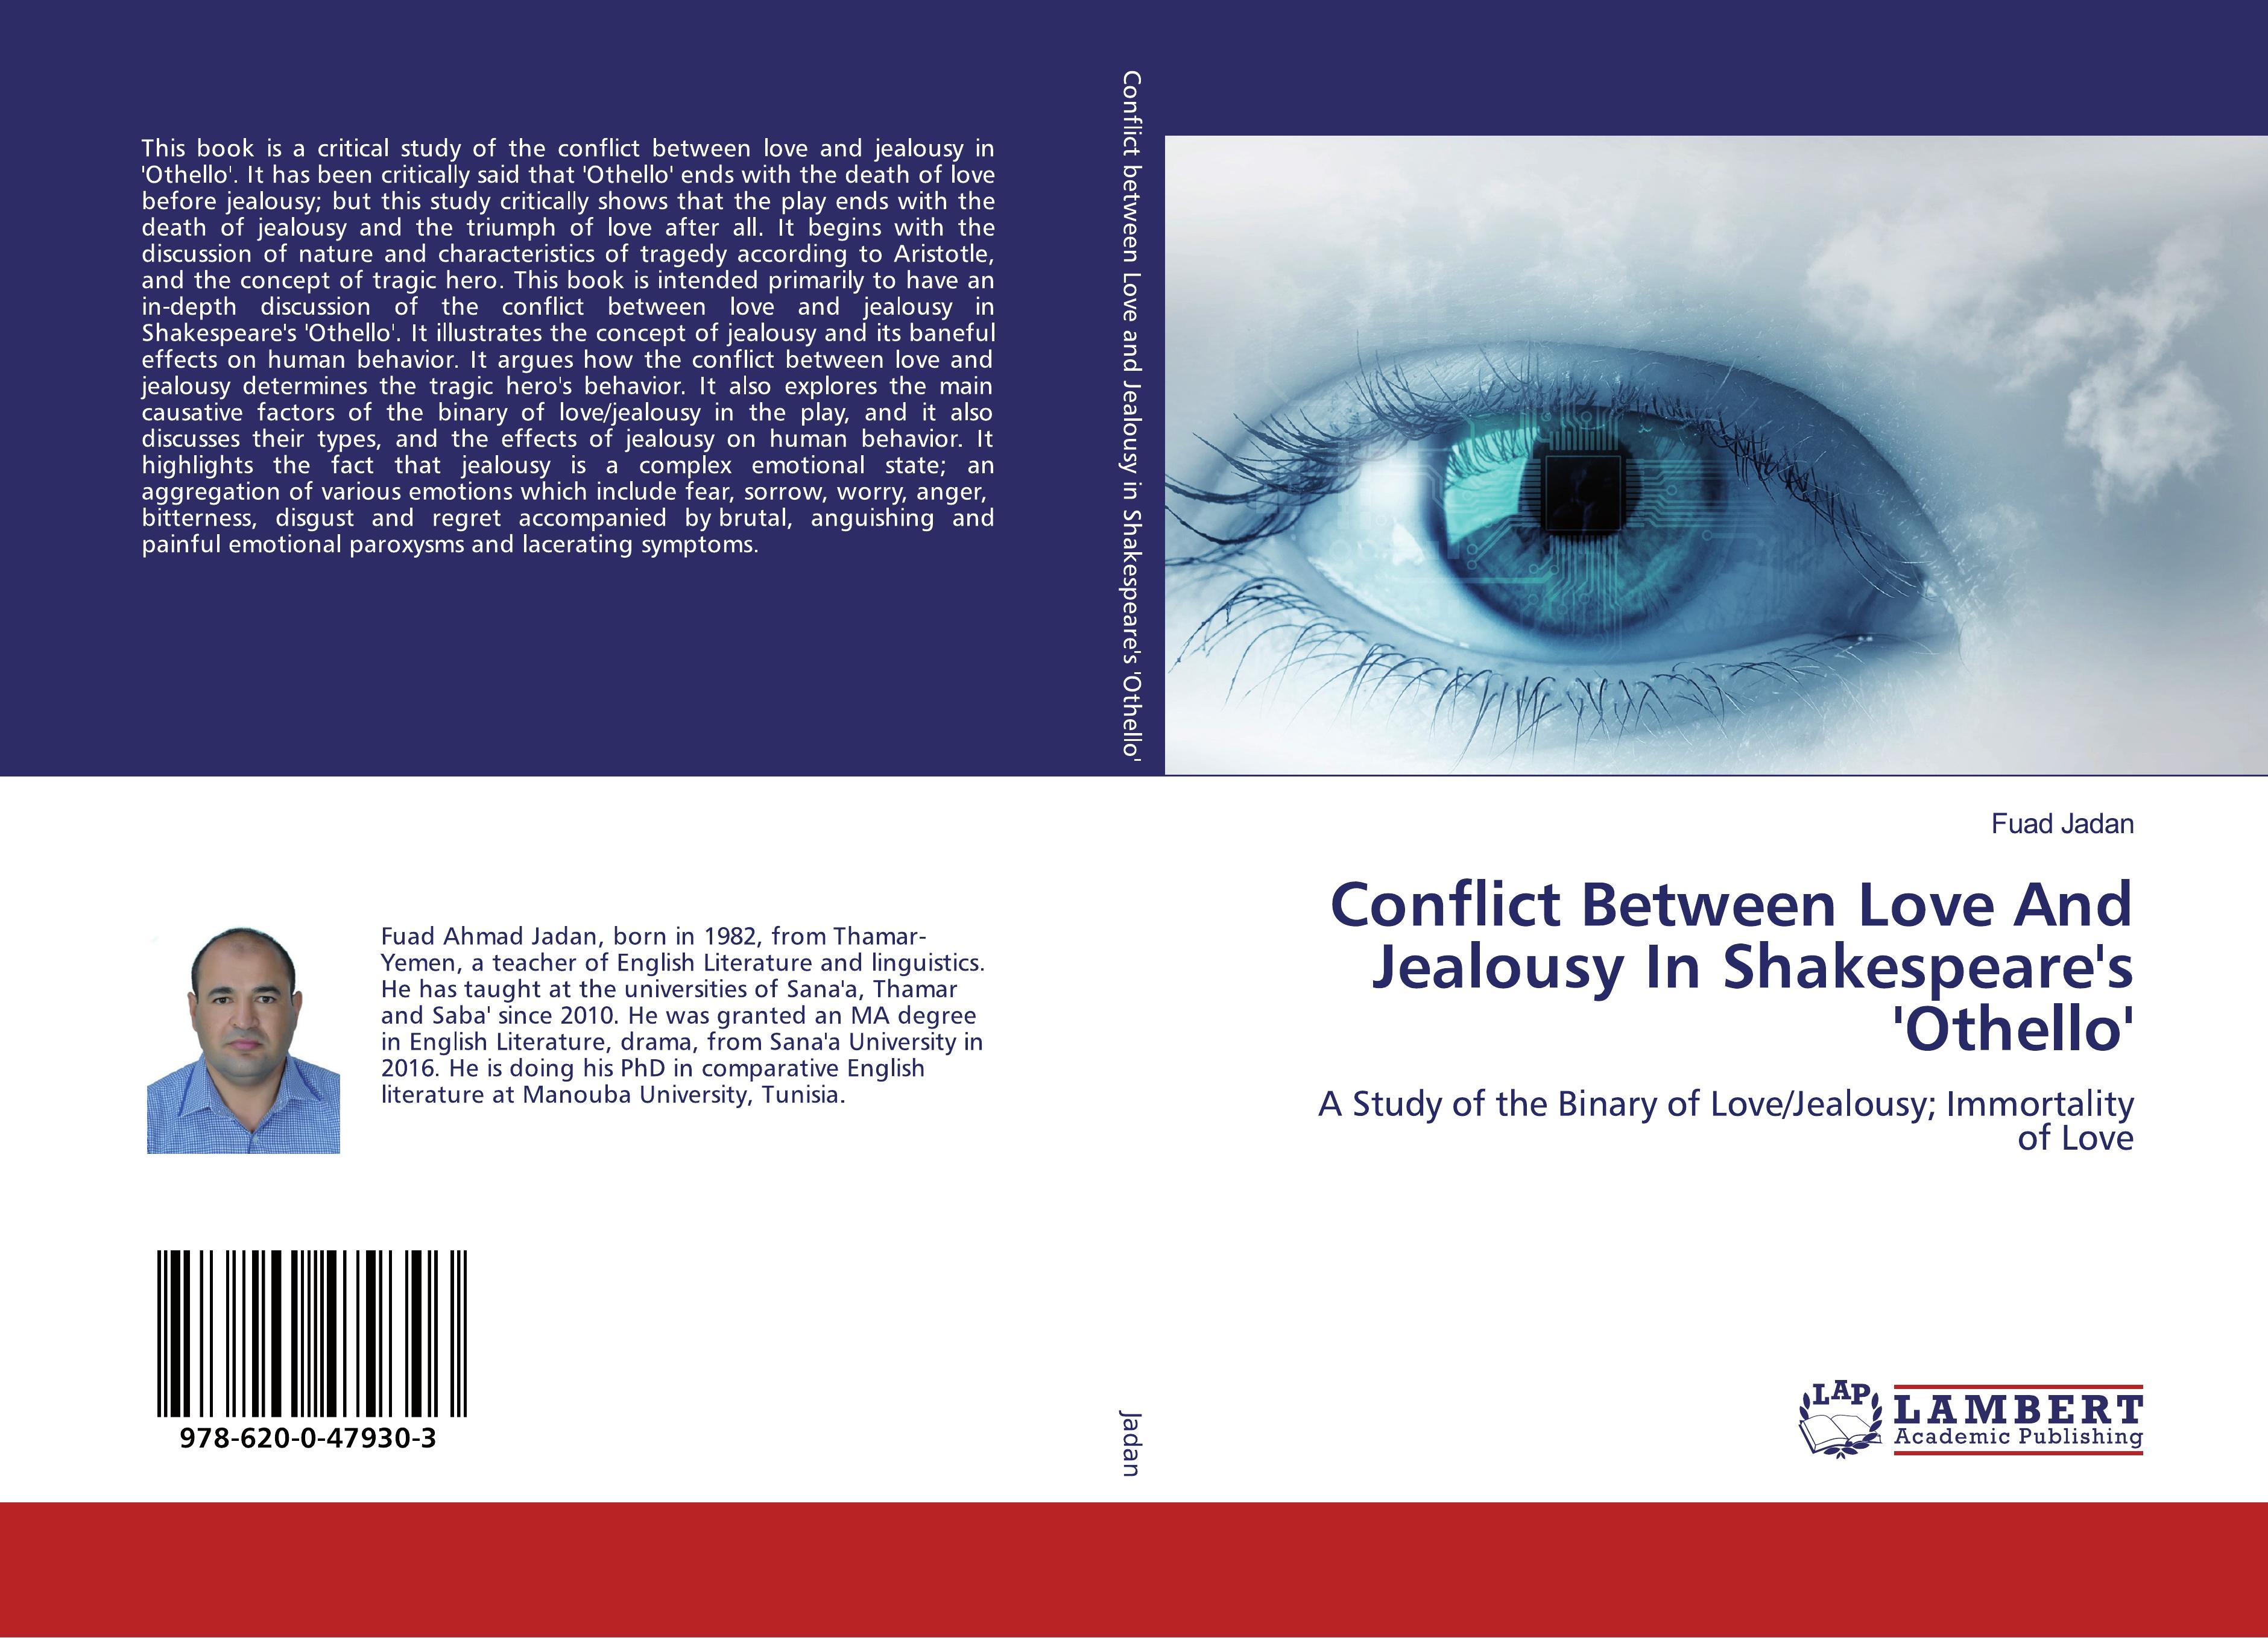 Conflict Between Love And Jealousy In Shakespeare s  Othello - Fuad Jadan